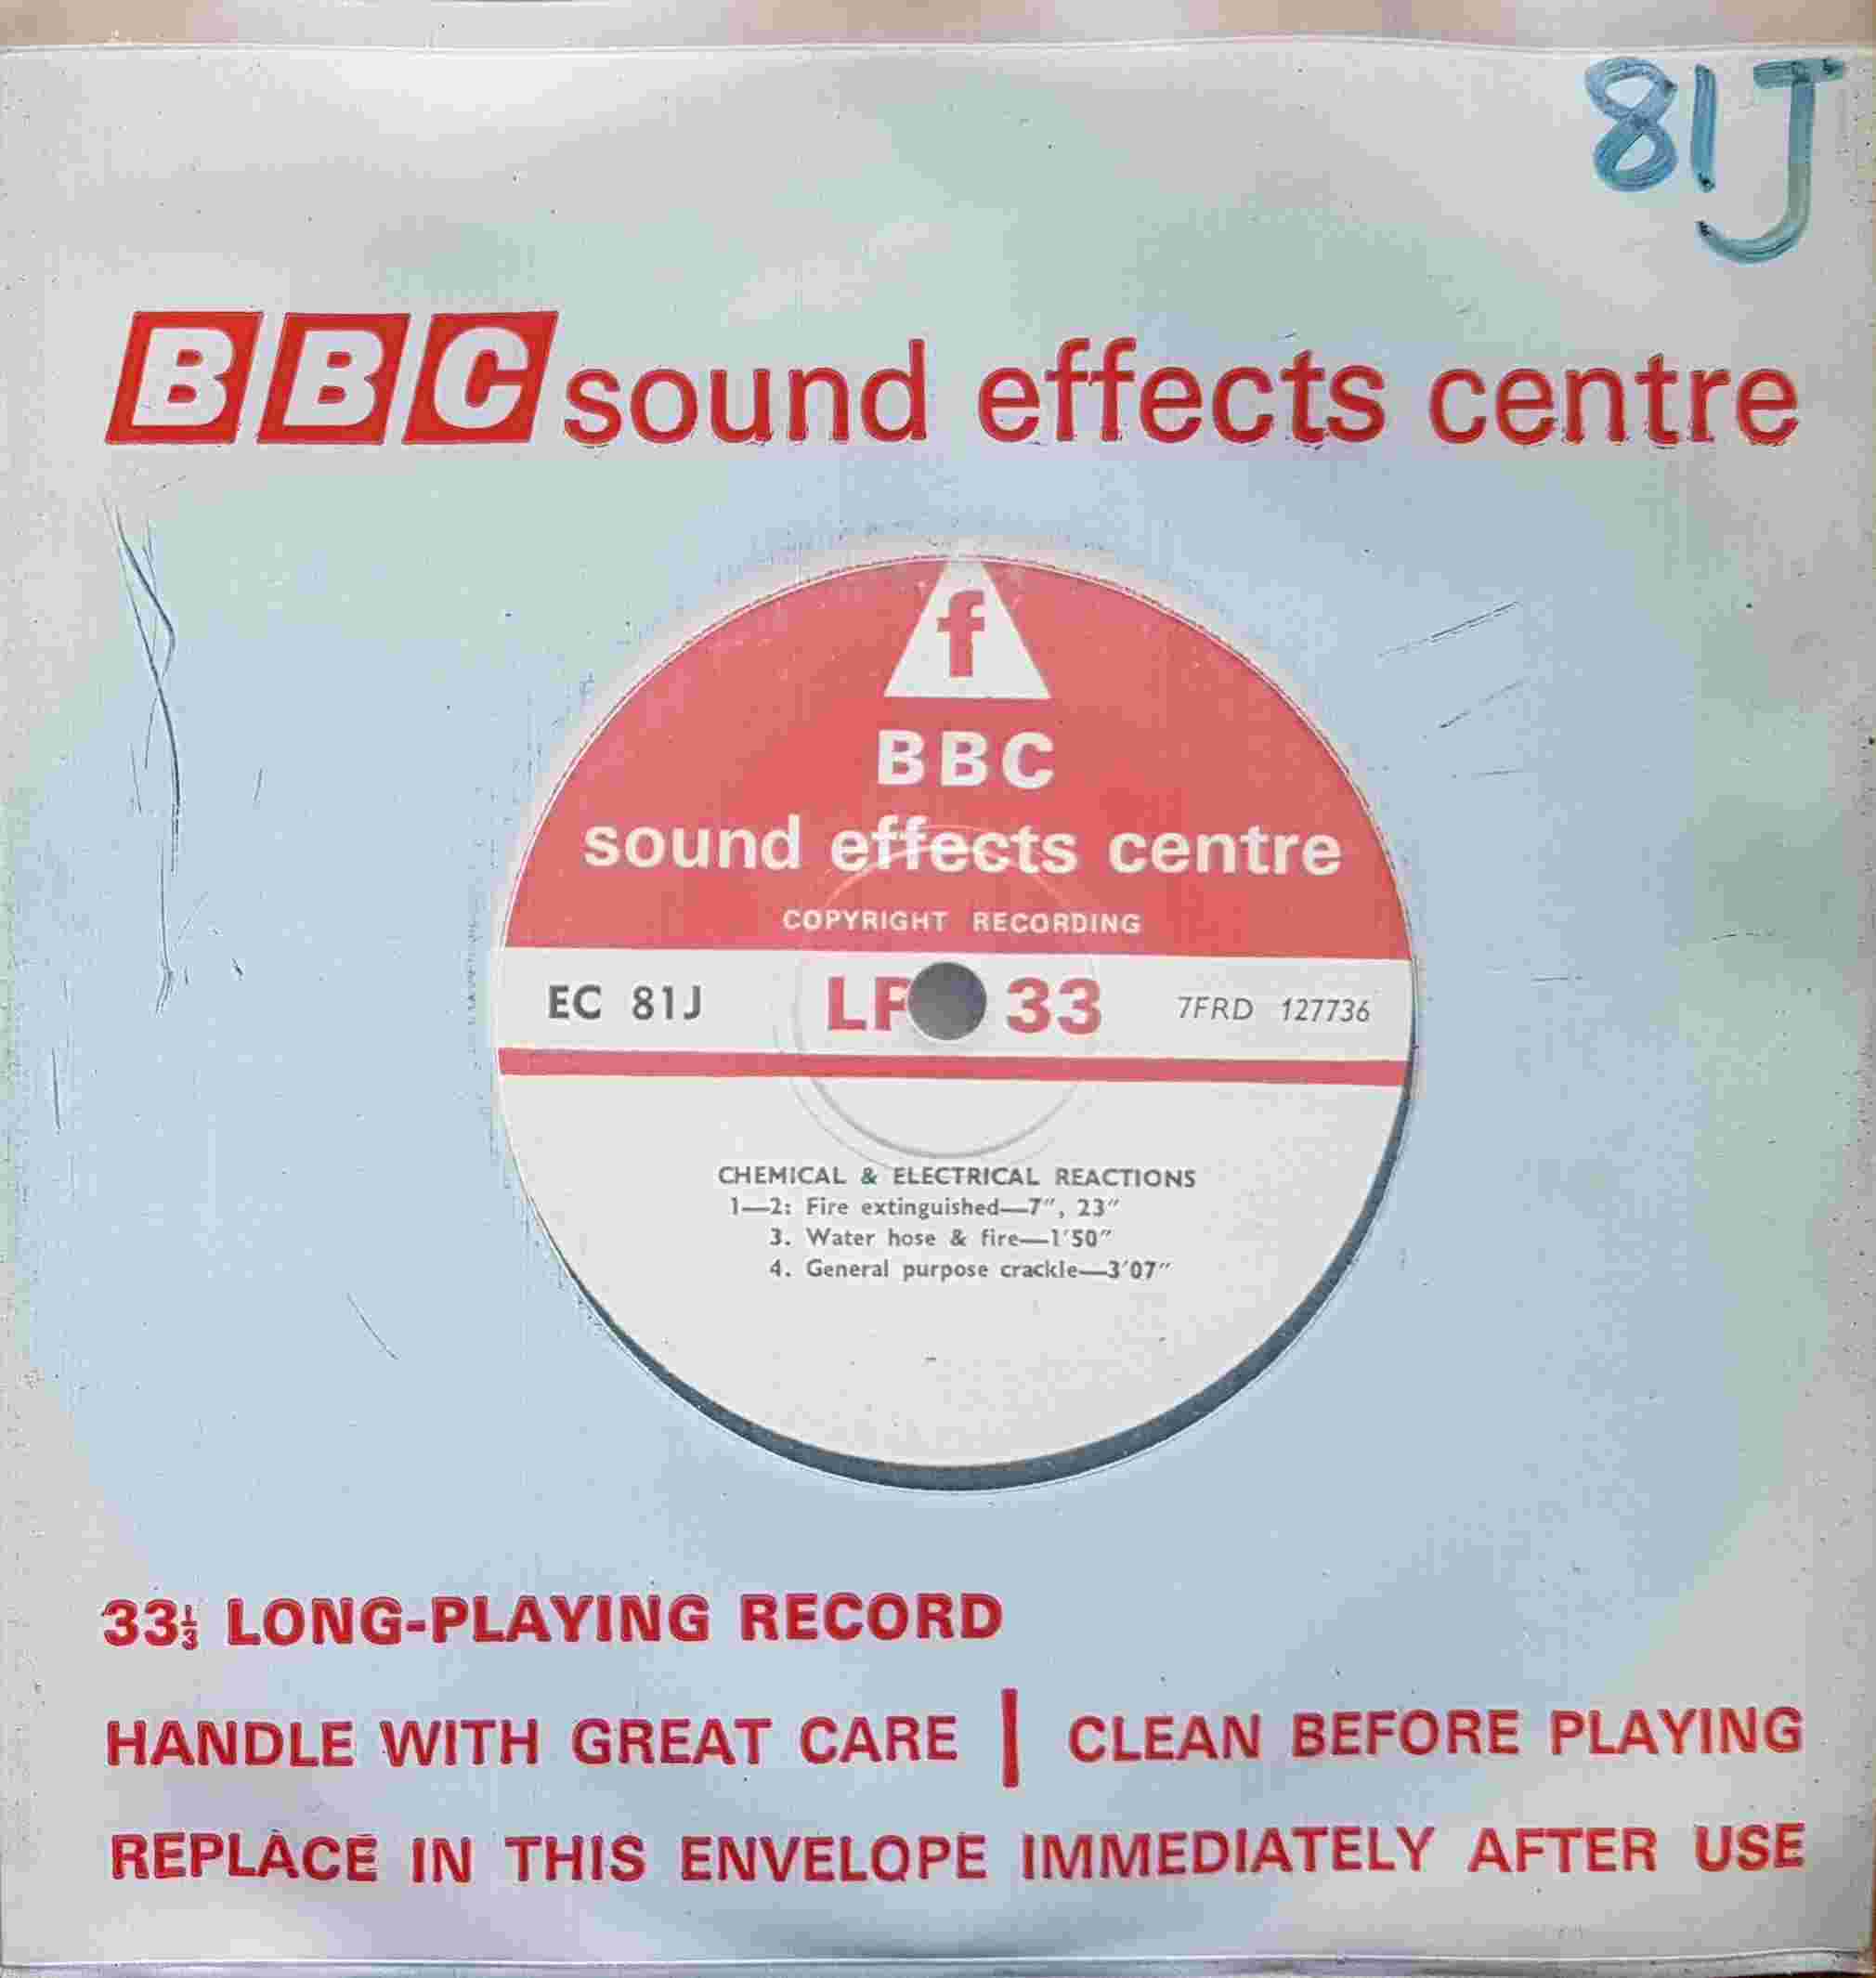 Picture of EC 81J Chemical & electrical reaction by artist Not registered from the BBC records and Tapes library